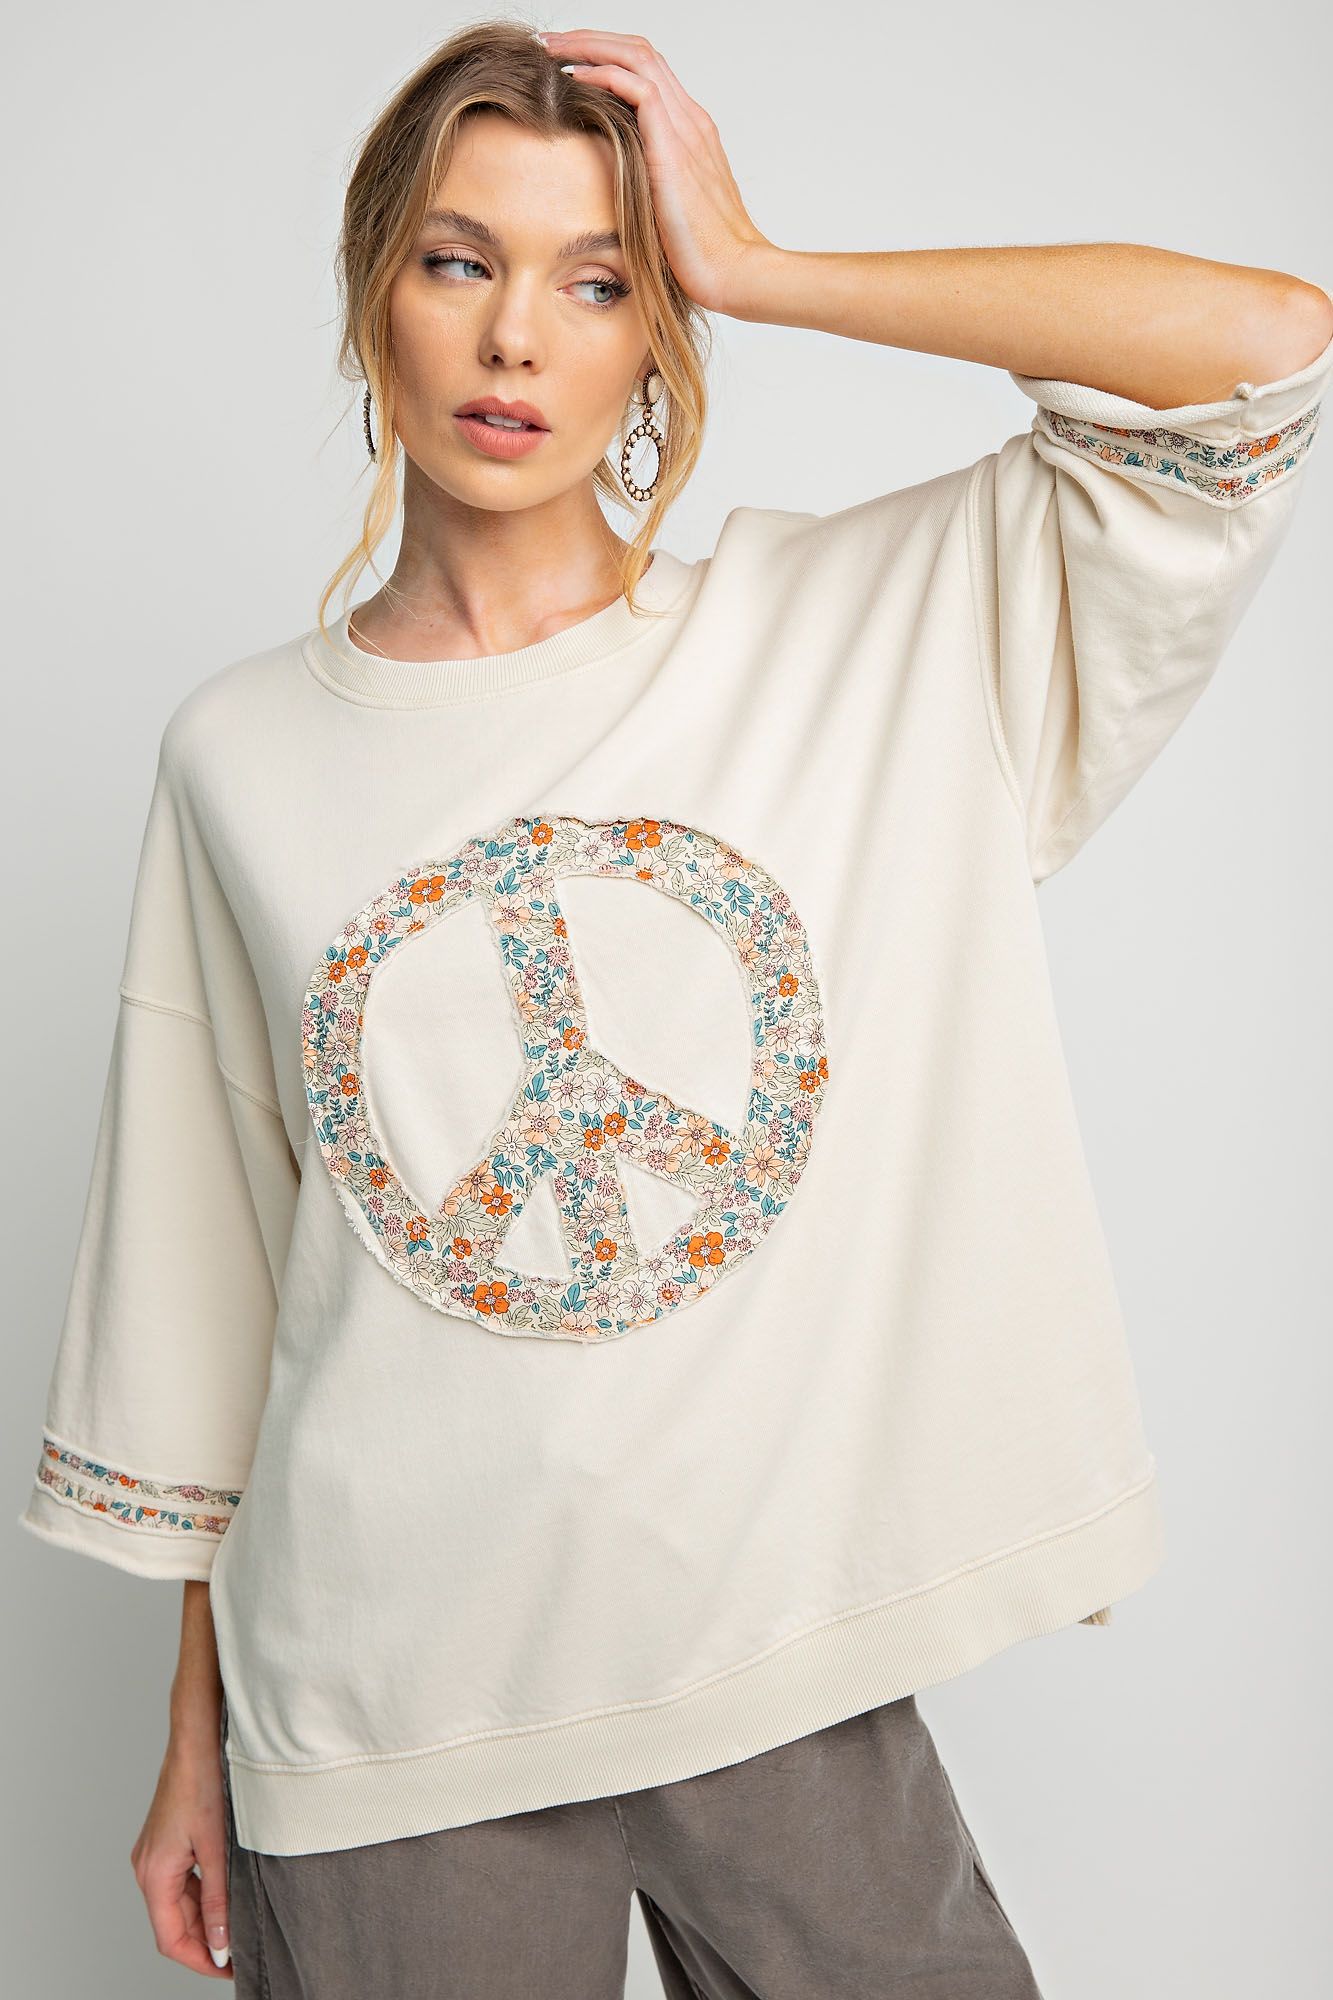 Slub mix ribbed fabric mineral wash top with peace sign symbol RESTOCKED Blouse Easel Beige Small 